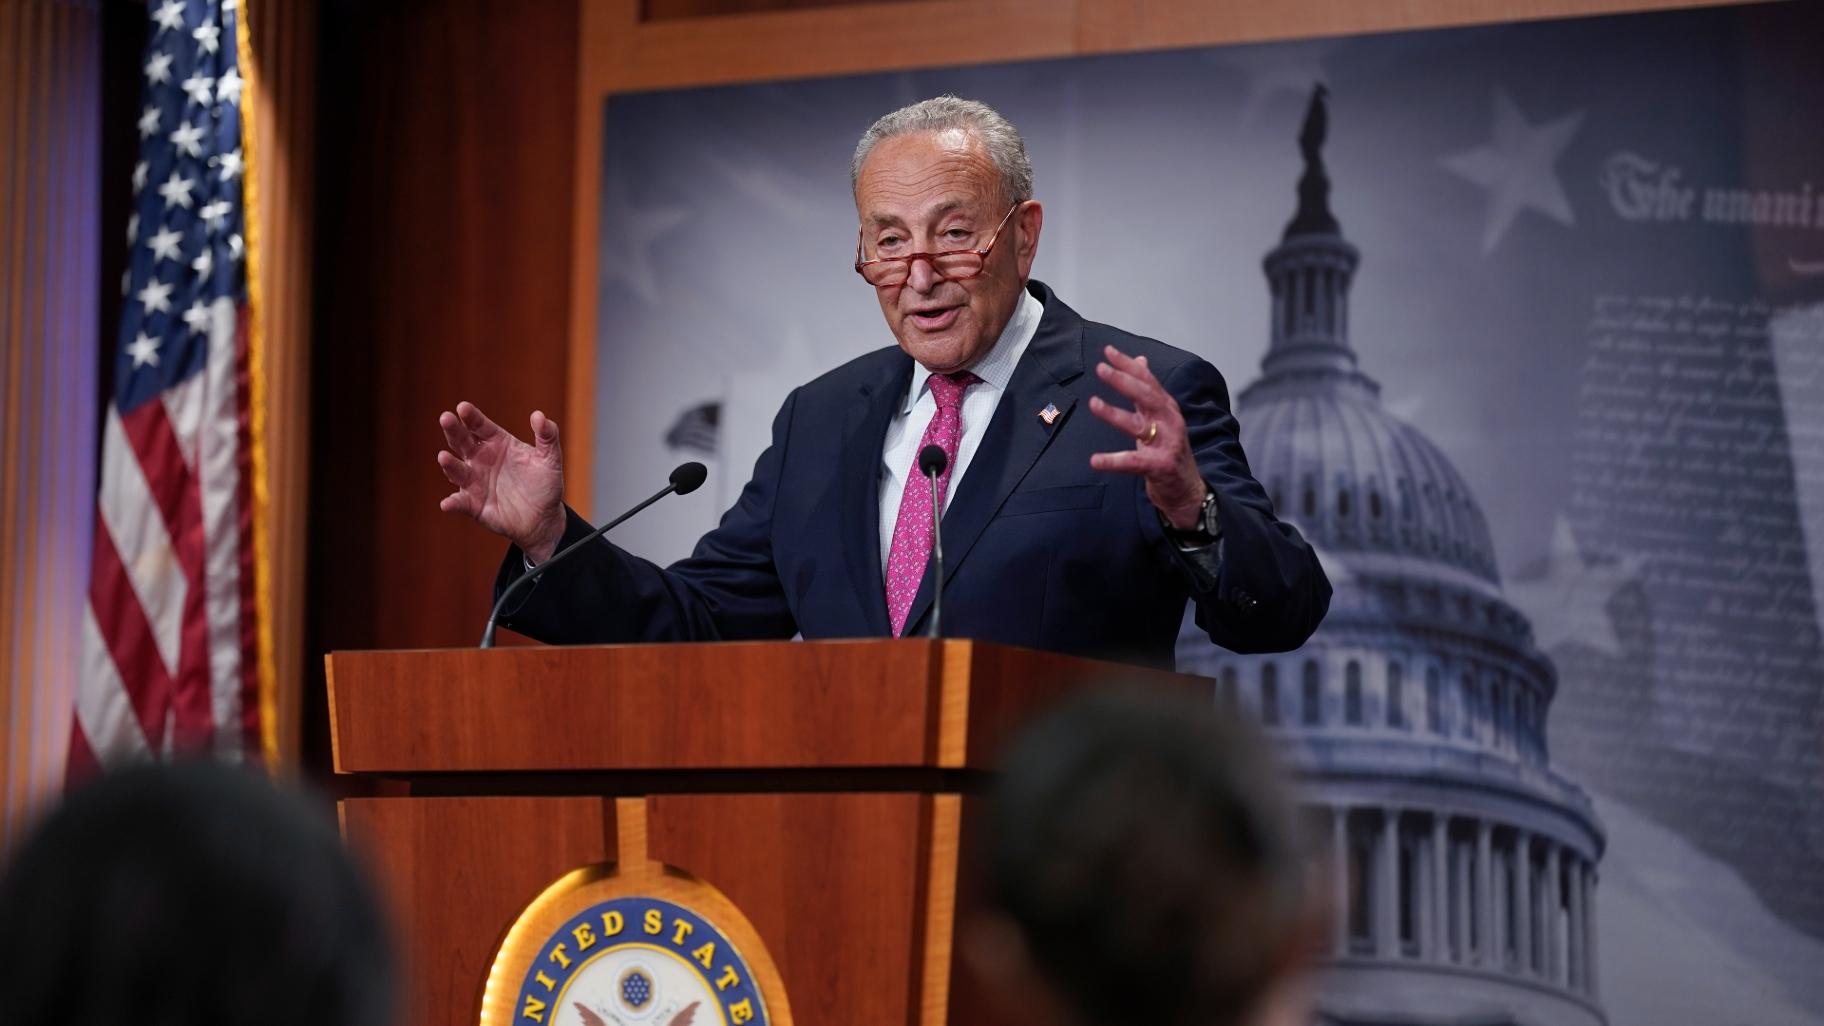 Senate Majority Leader Chuck Schumer, D-N.Y., speaks to reporters after a hectic series of amendment votes and final passage on the big debt ceiling and budget cuts package, at the Capitol in Washington, Thursday, June 1, 2023. (AP Photo / J. Scott Applewhite)